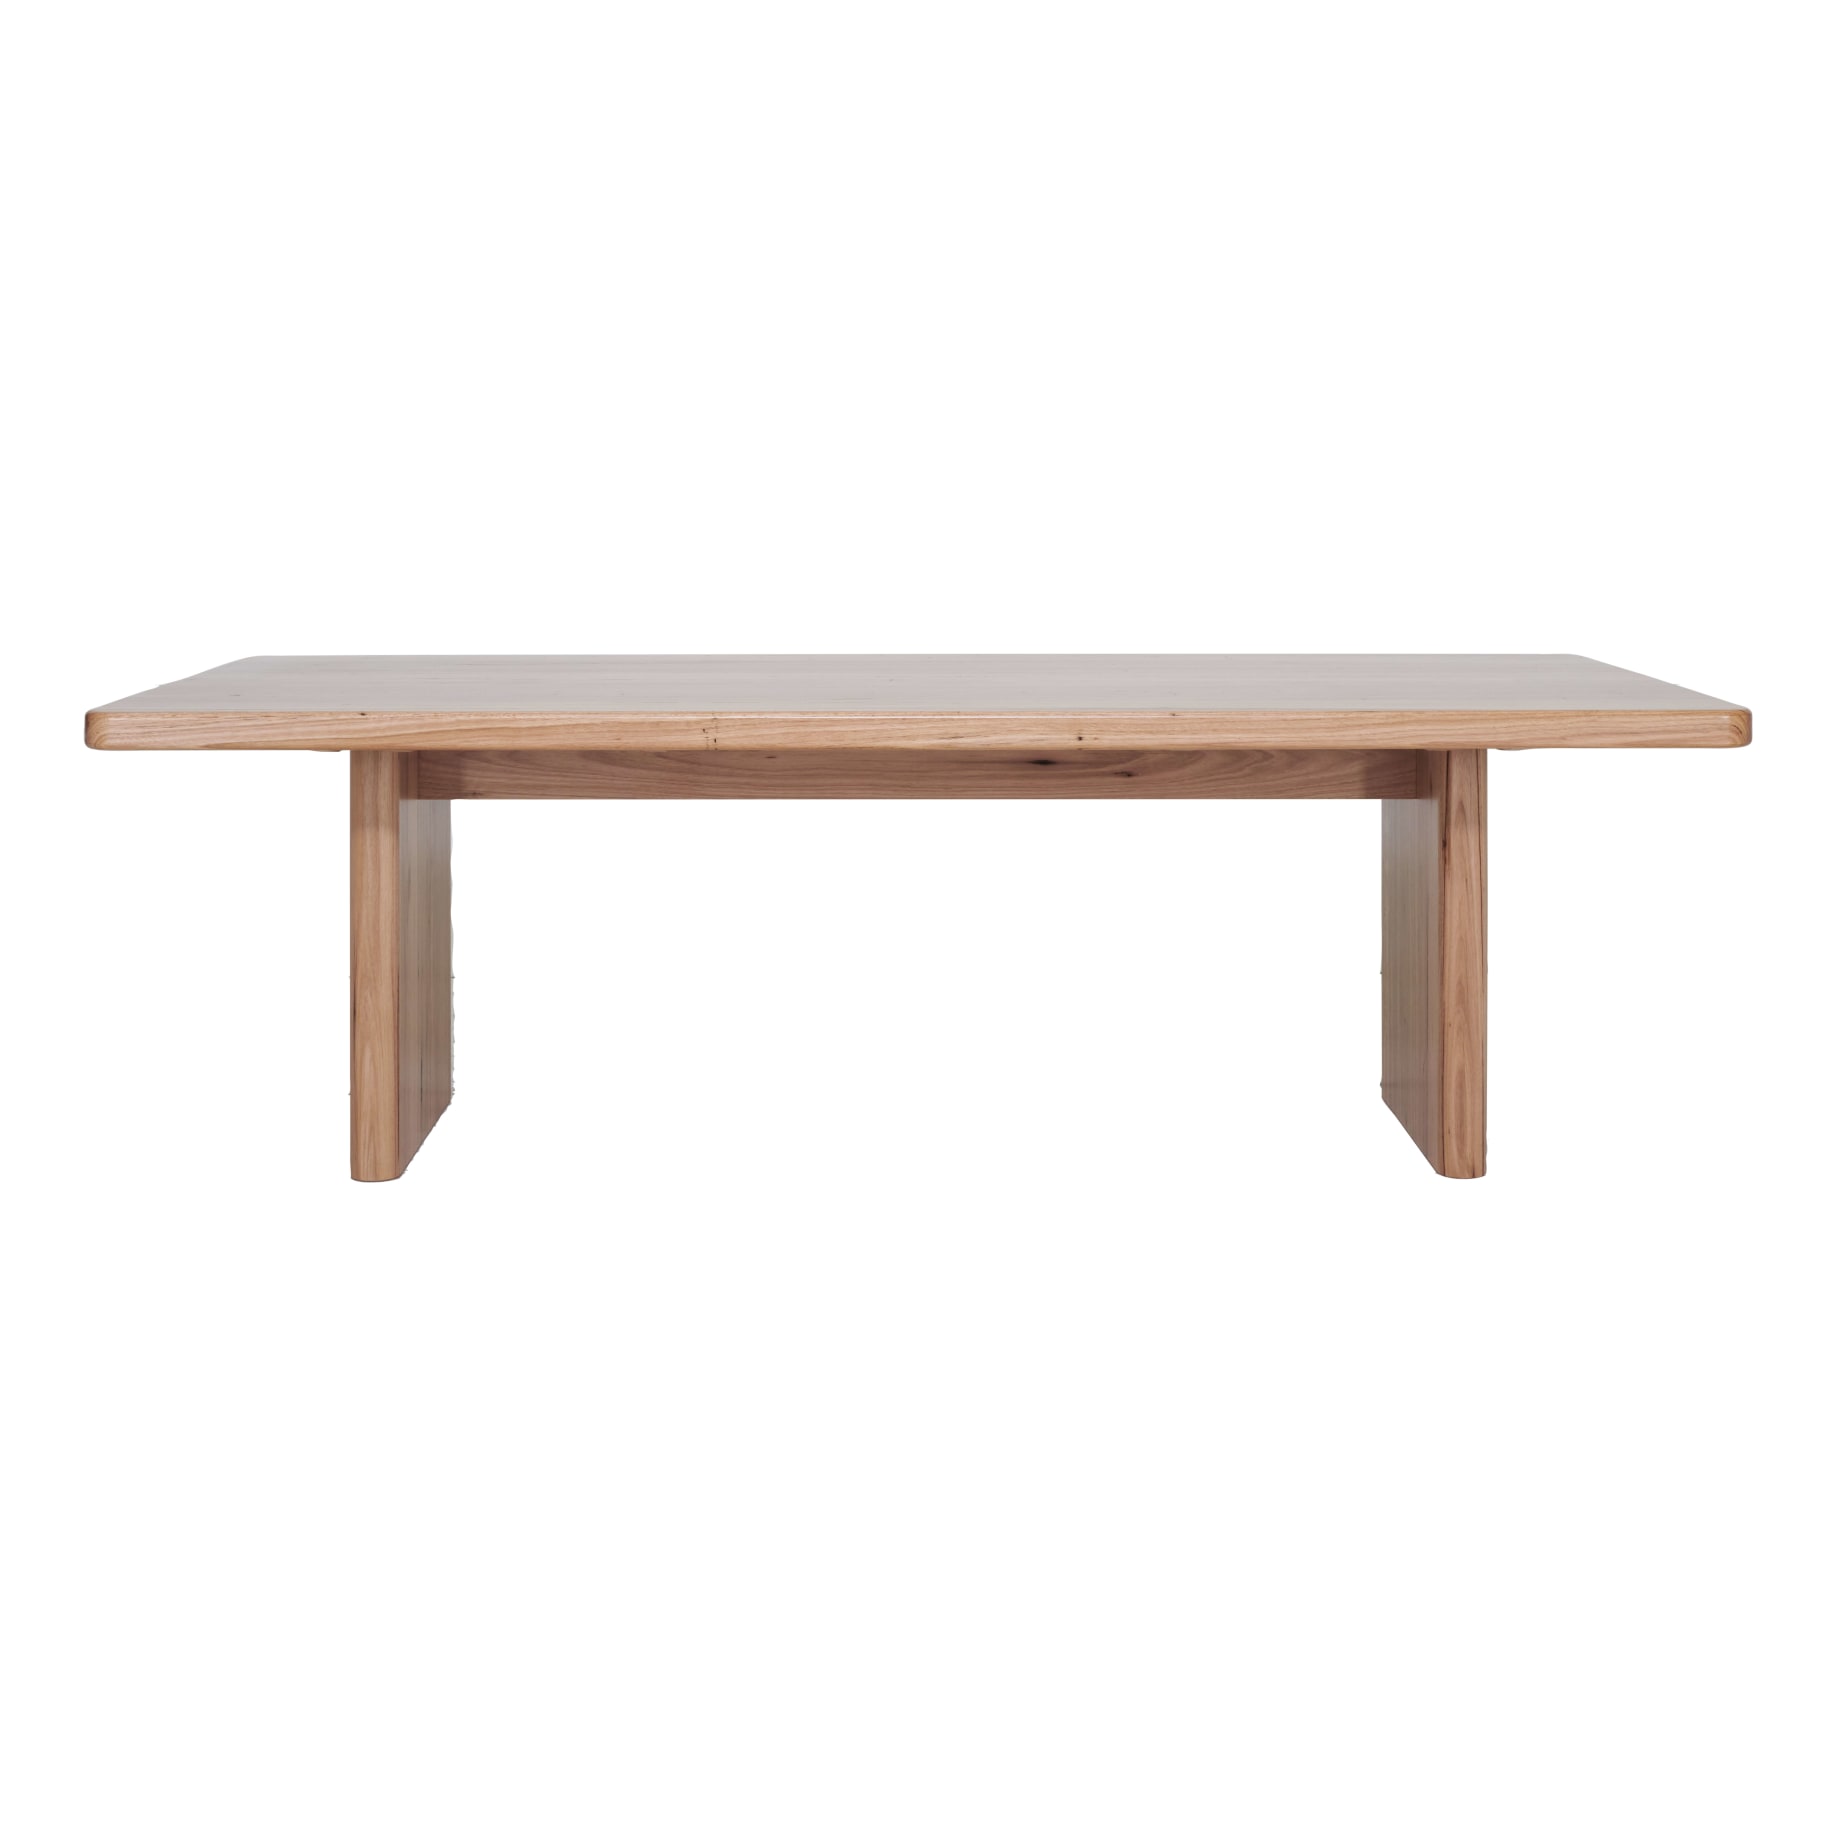 Harper Dining Table 250cm in Australian Timbers